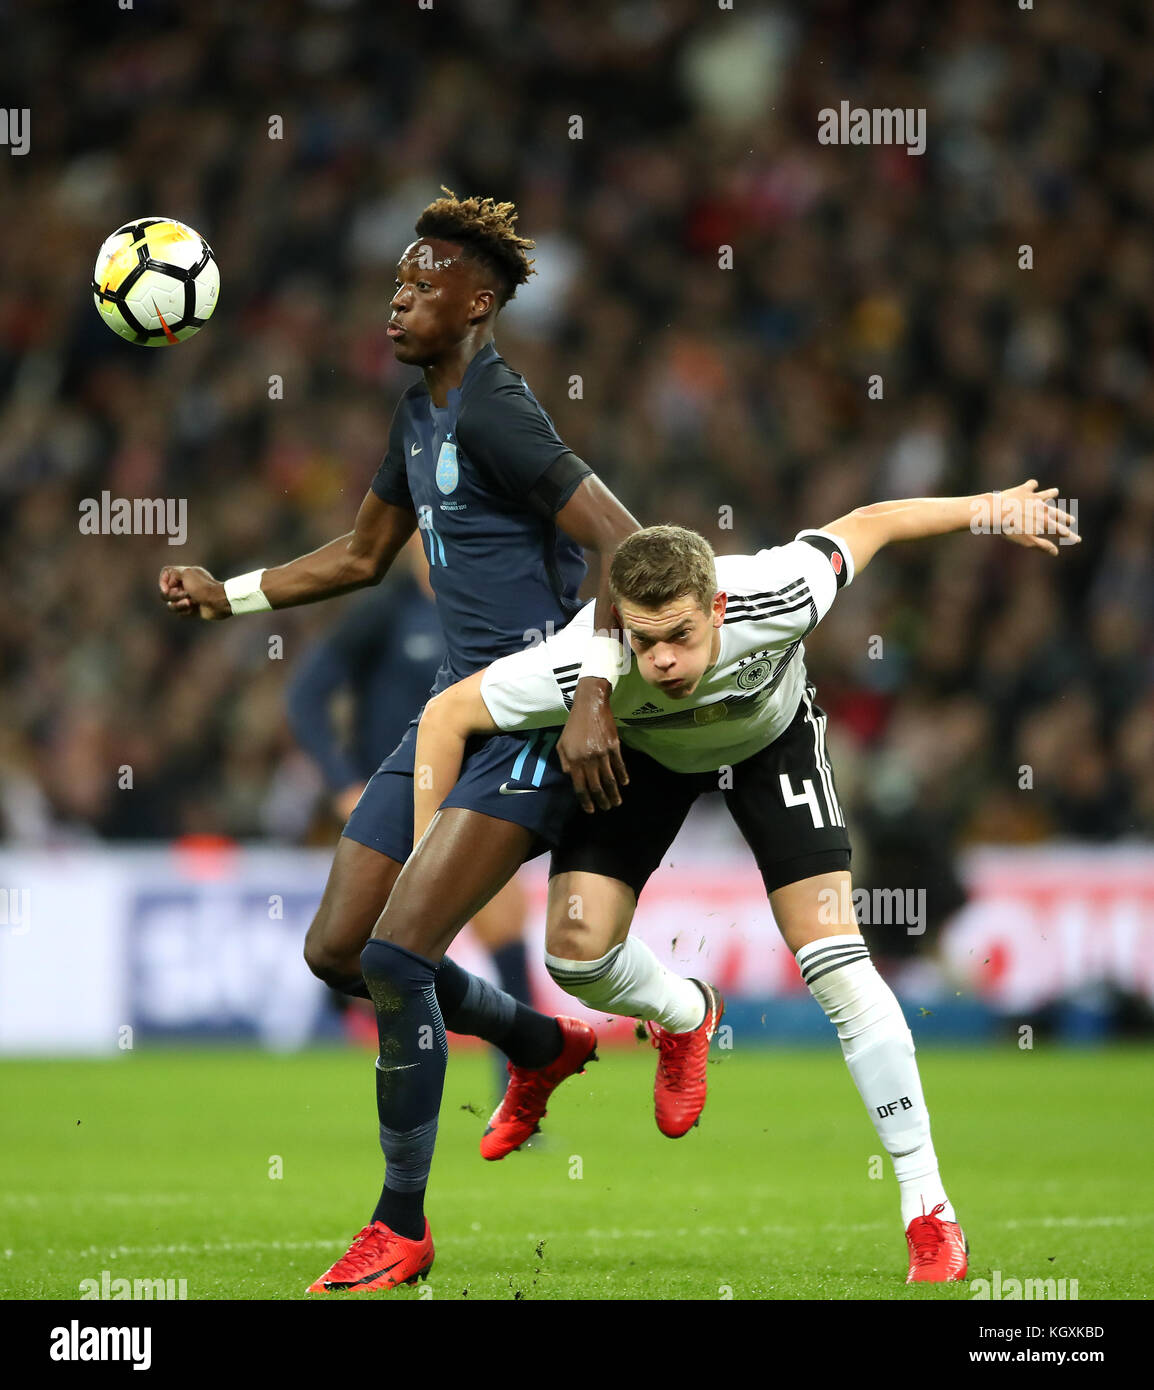 England's Tammy Abraham (left) and Germany's Matthias Ginter (right) battle for the ball during the International Friendly match at Wembley Stadium, London. Stock Photo